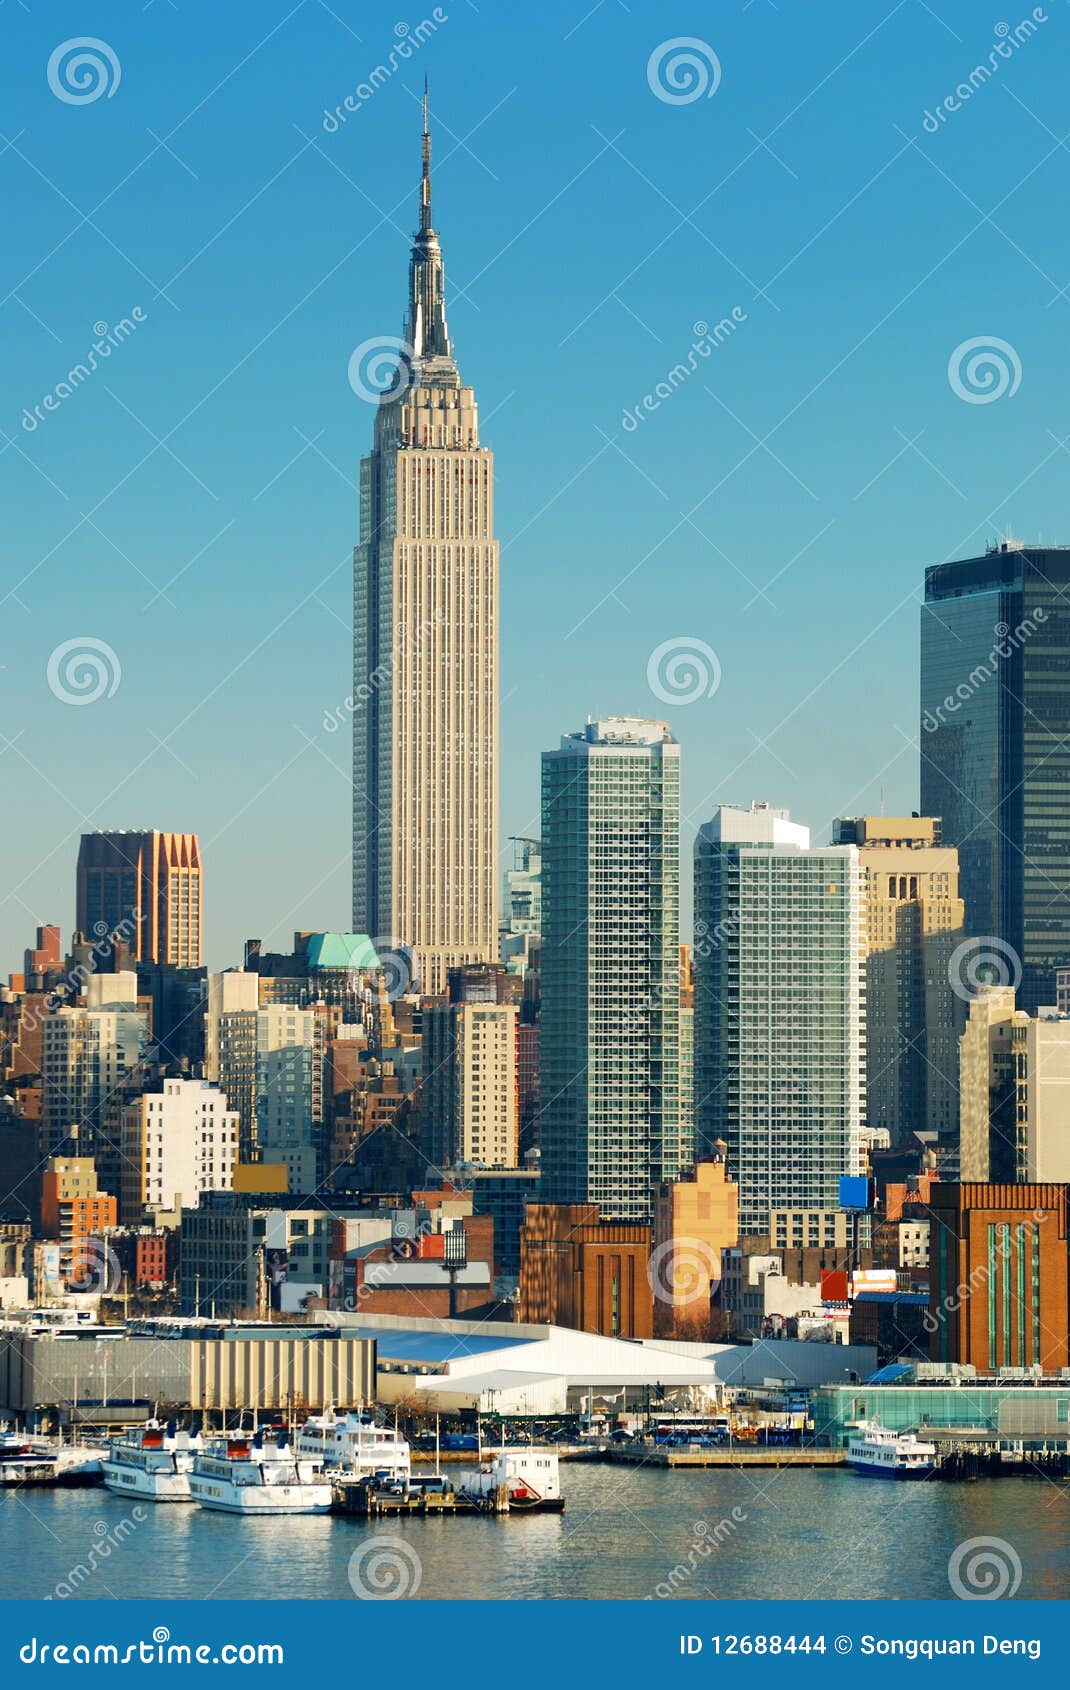 New York City Empire State Building Editorial Stock Image 